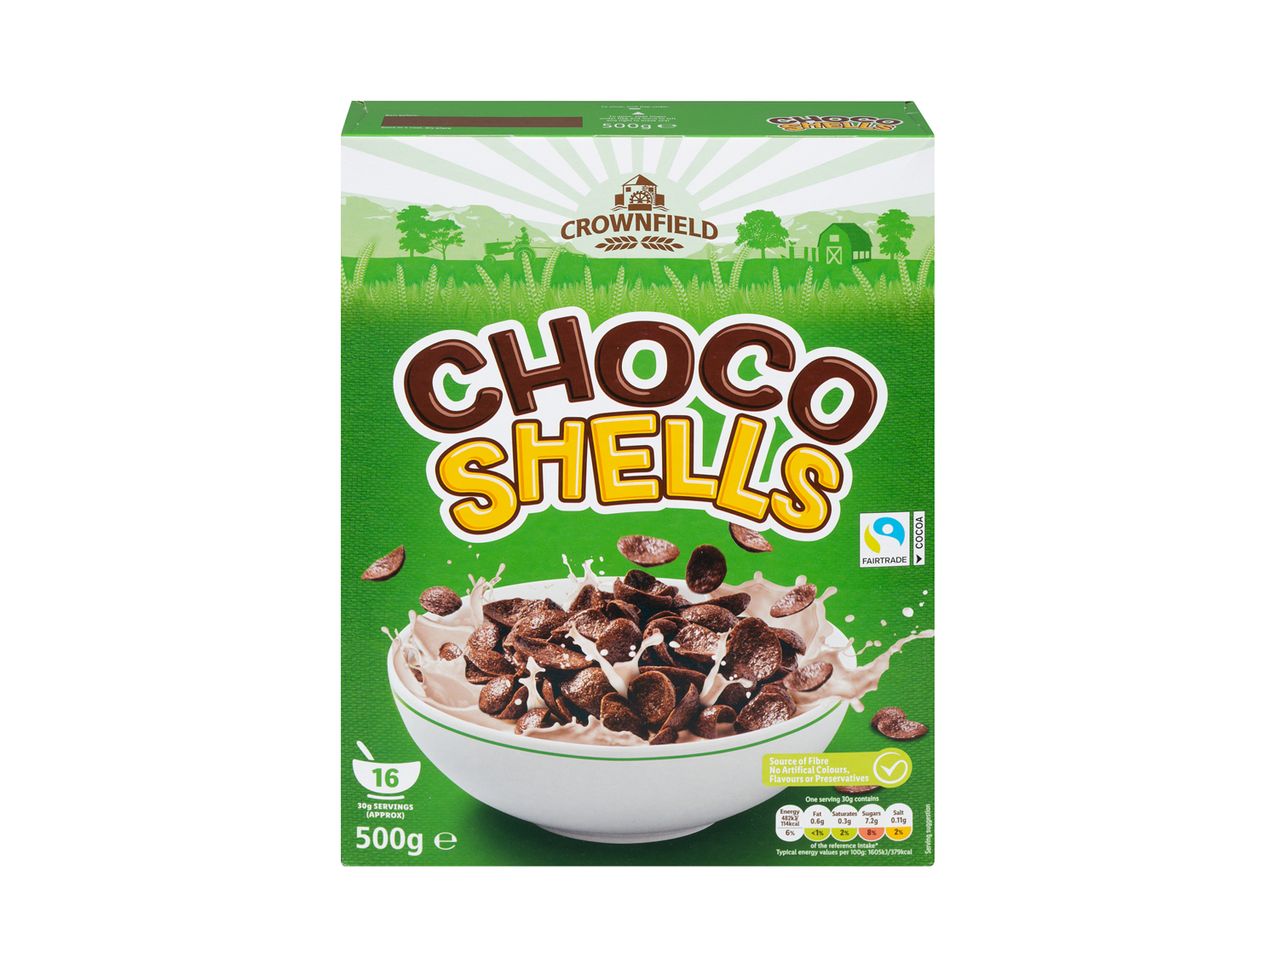 Go to full screen view: Crownfield Choco Shells - Image 1